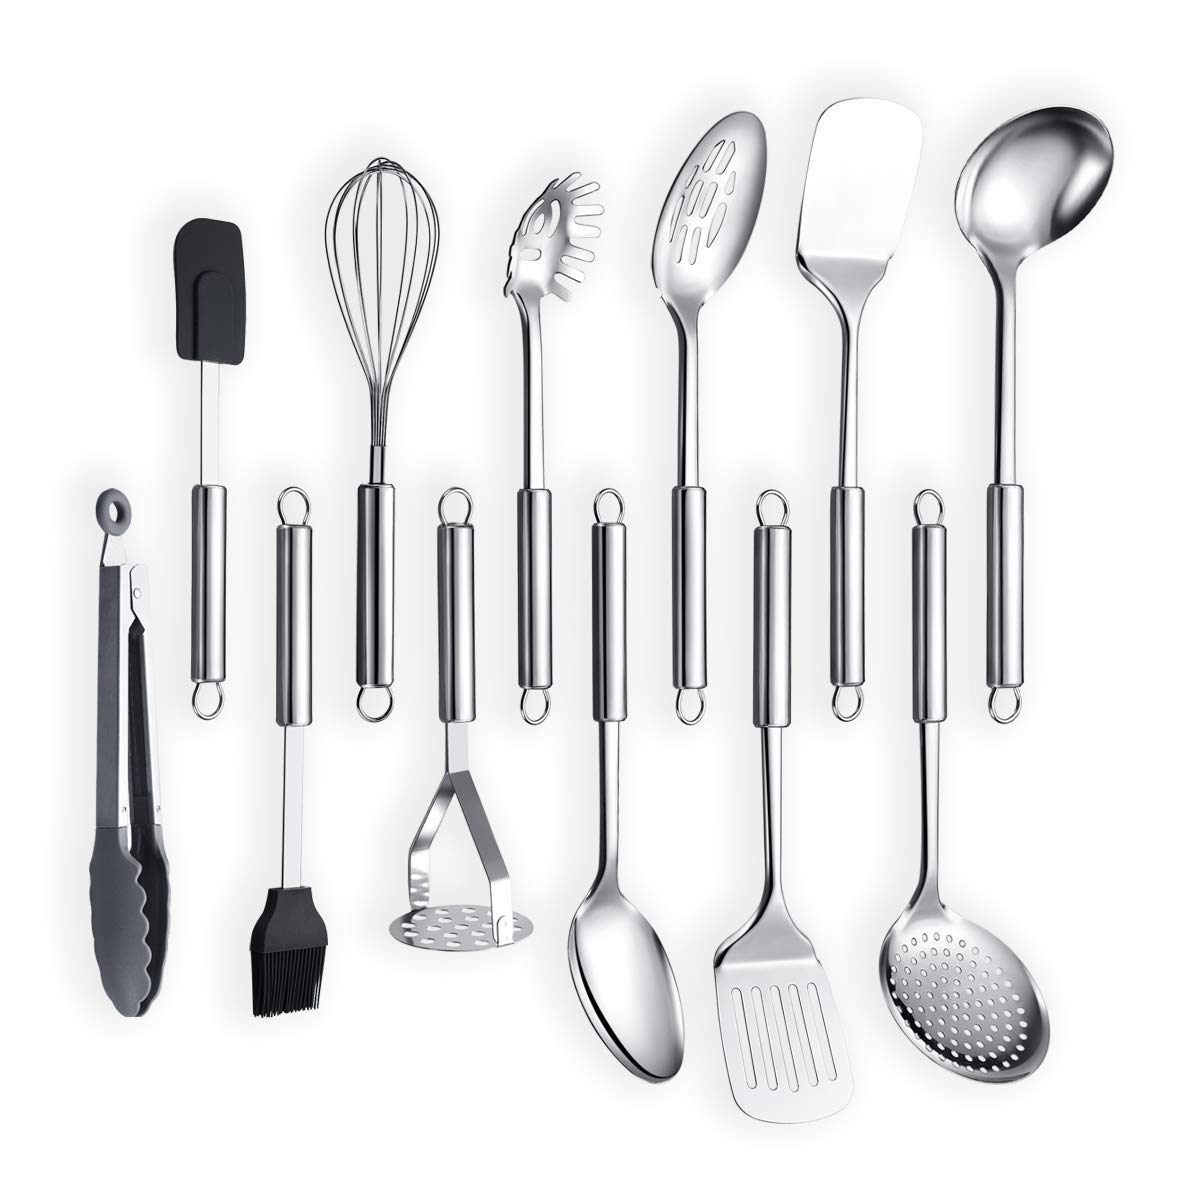 Berglander Cooking Utensil Set 12 Piece Stainless Steel Kitchen Tool Set, Include Cooking Spoon, Spatula, Whisk, Cooking Tong an